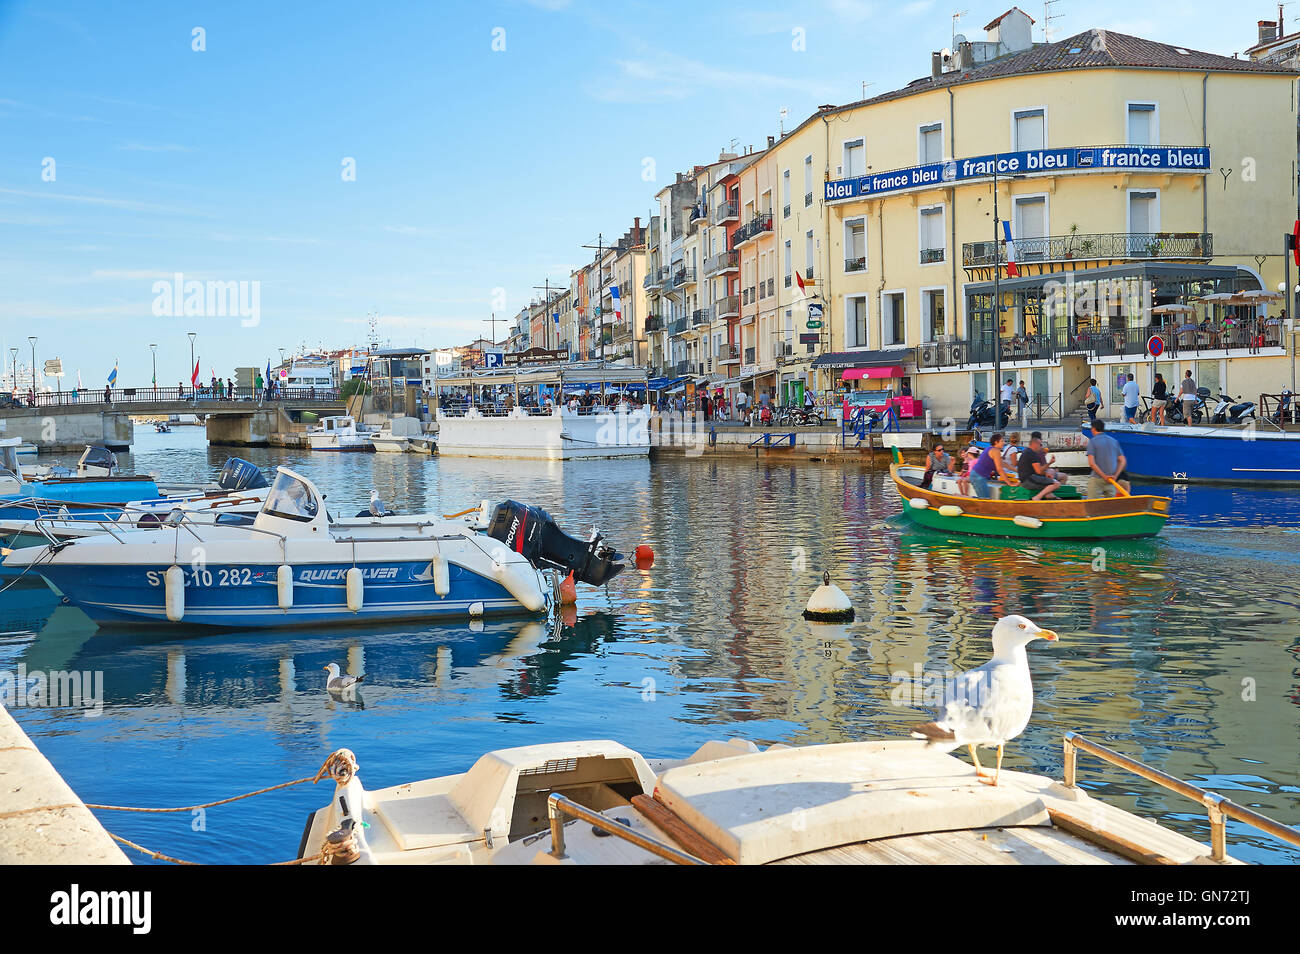 Boats in the canal harbour network in Sete. Stock Photo